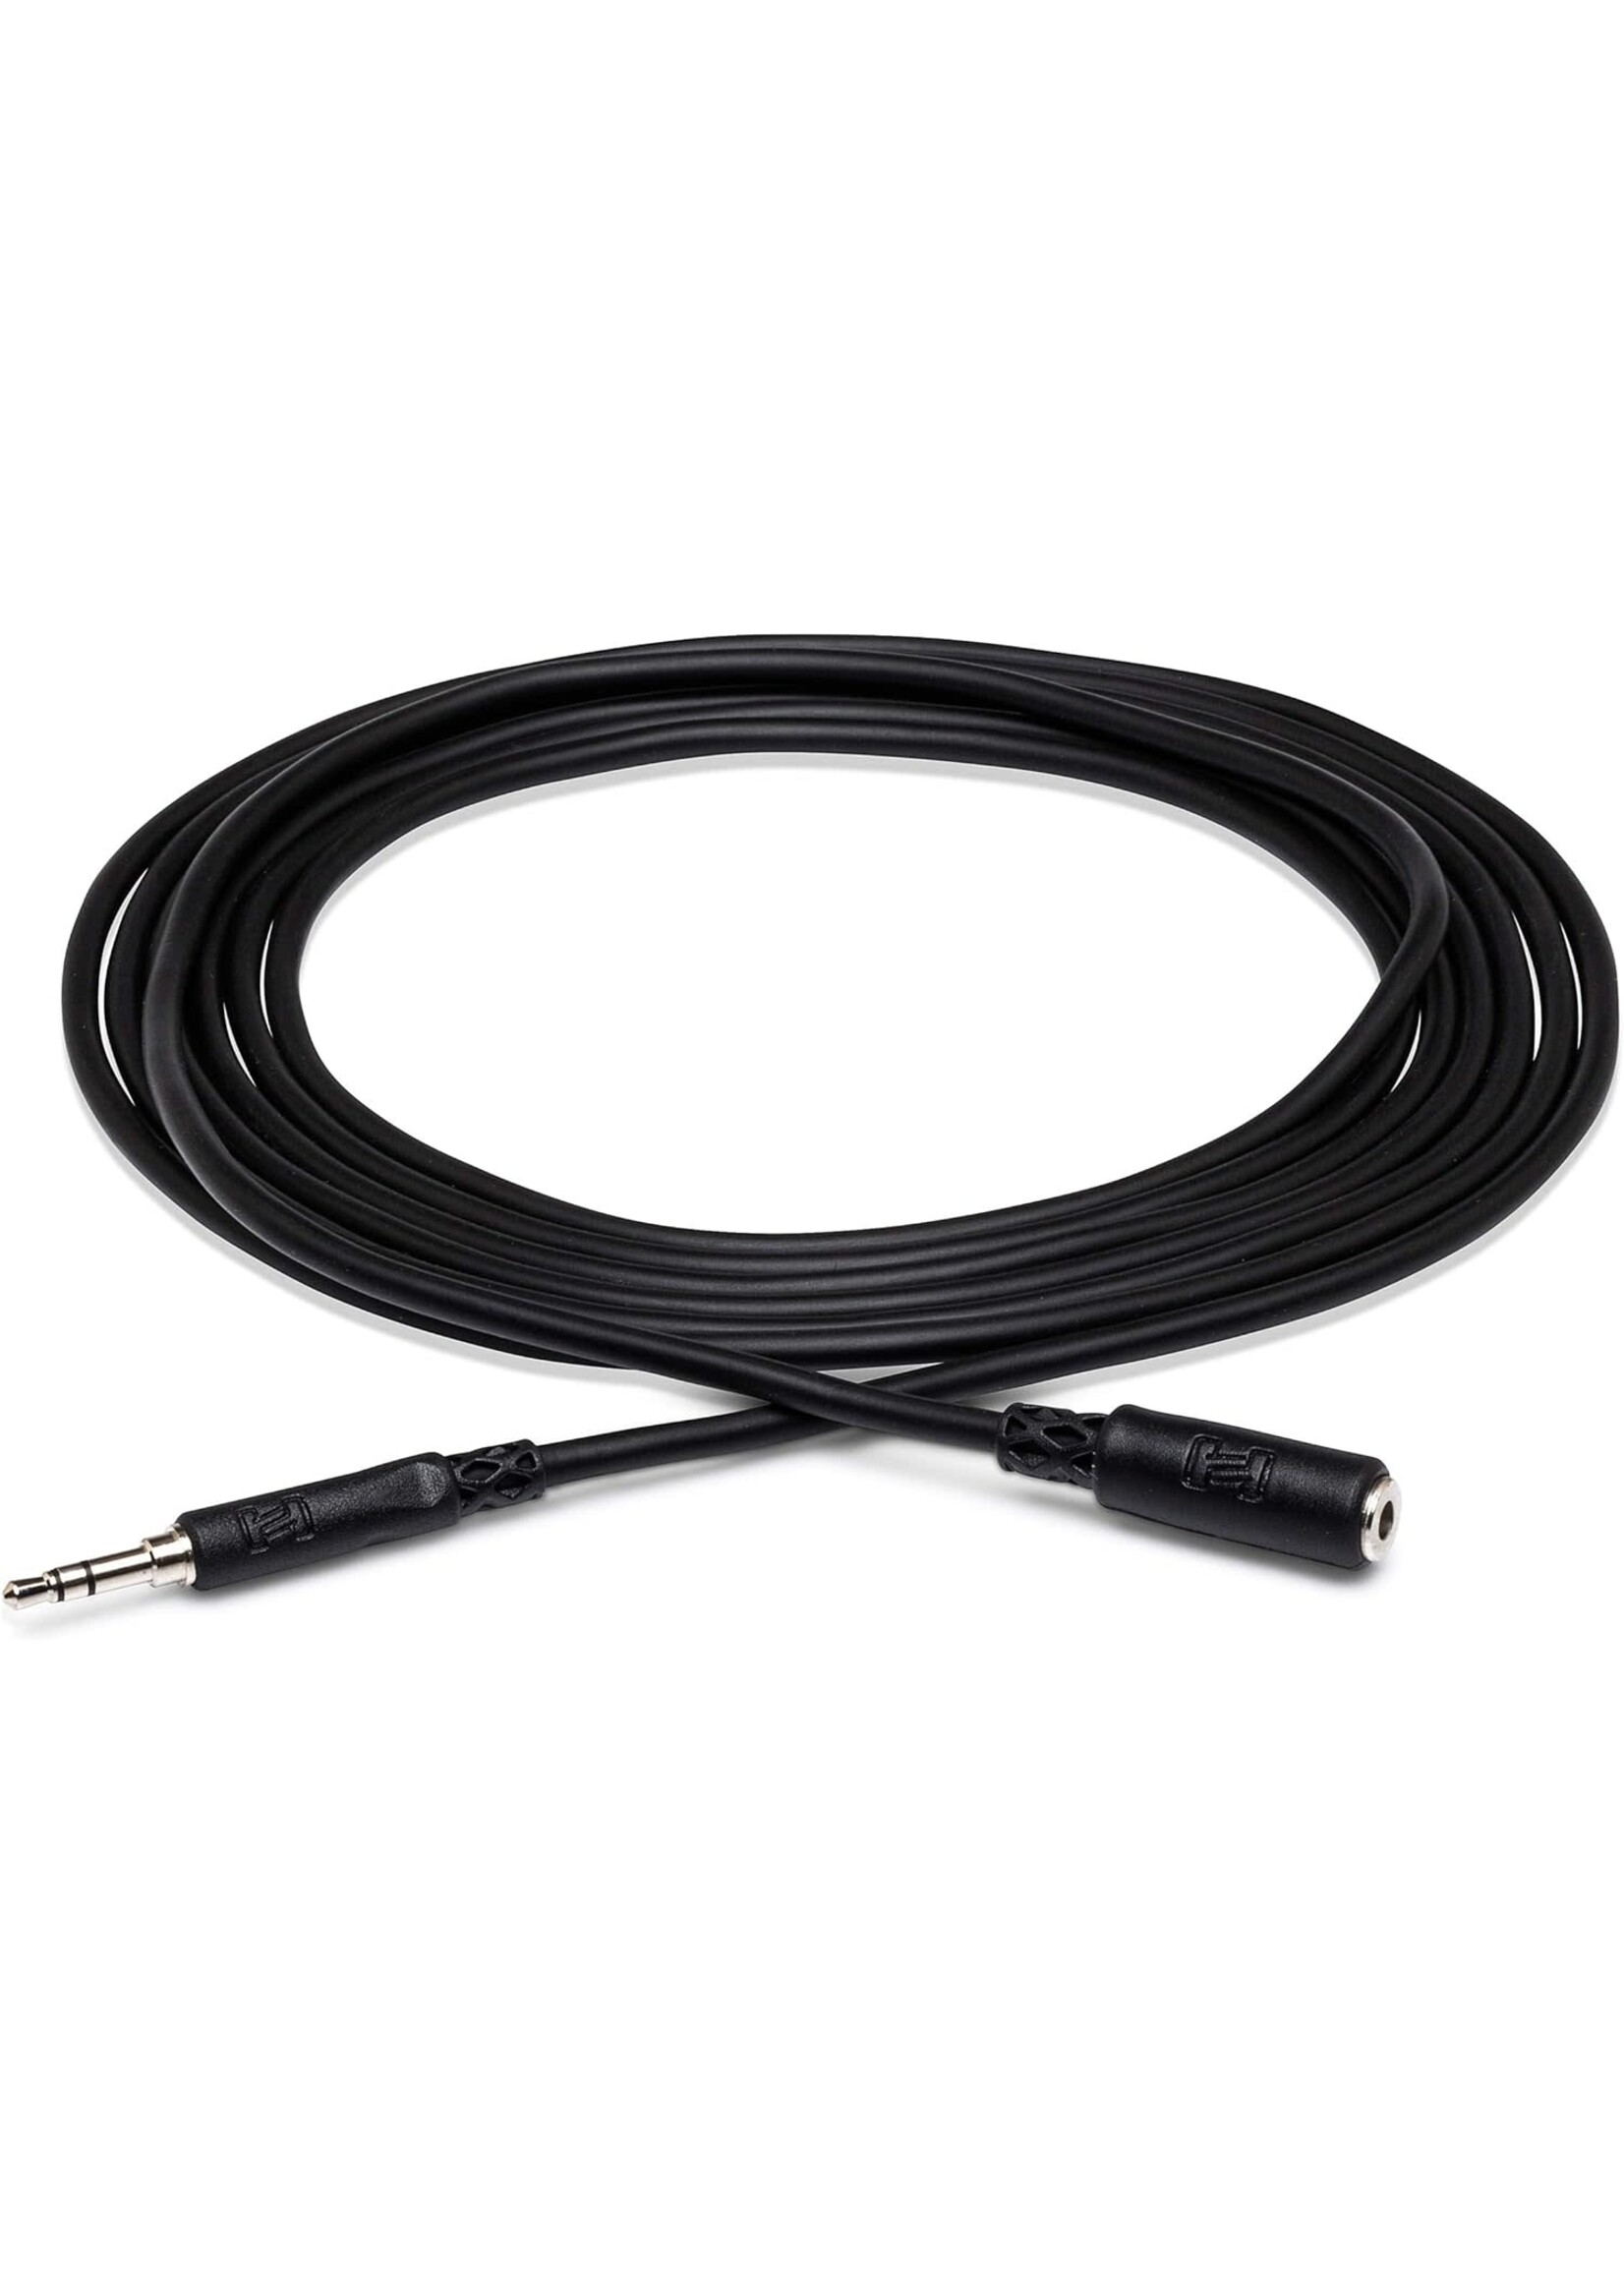 Hosa Hosa MHE-125 Headphone Extension Cable 3.5 mm TRS to 3.5 mm TRS - 25 ft